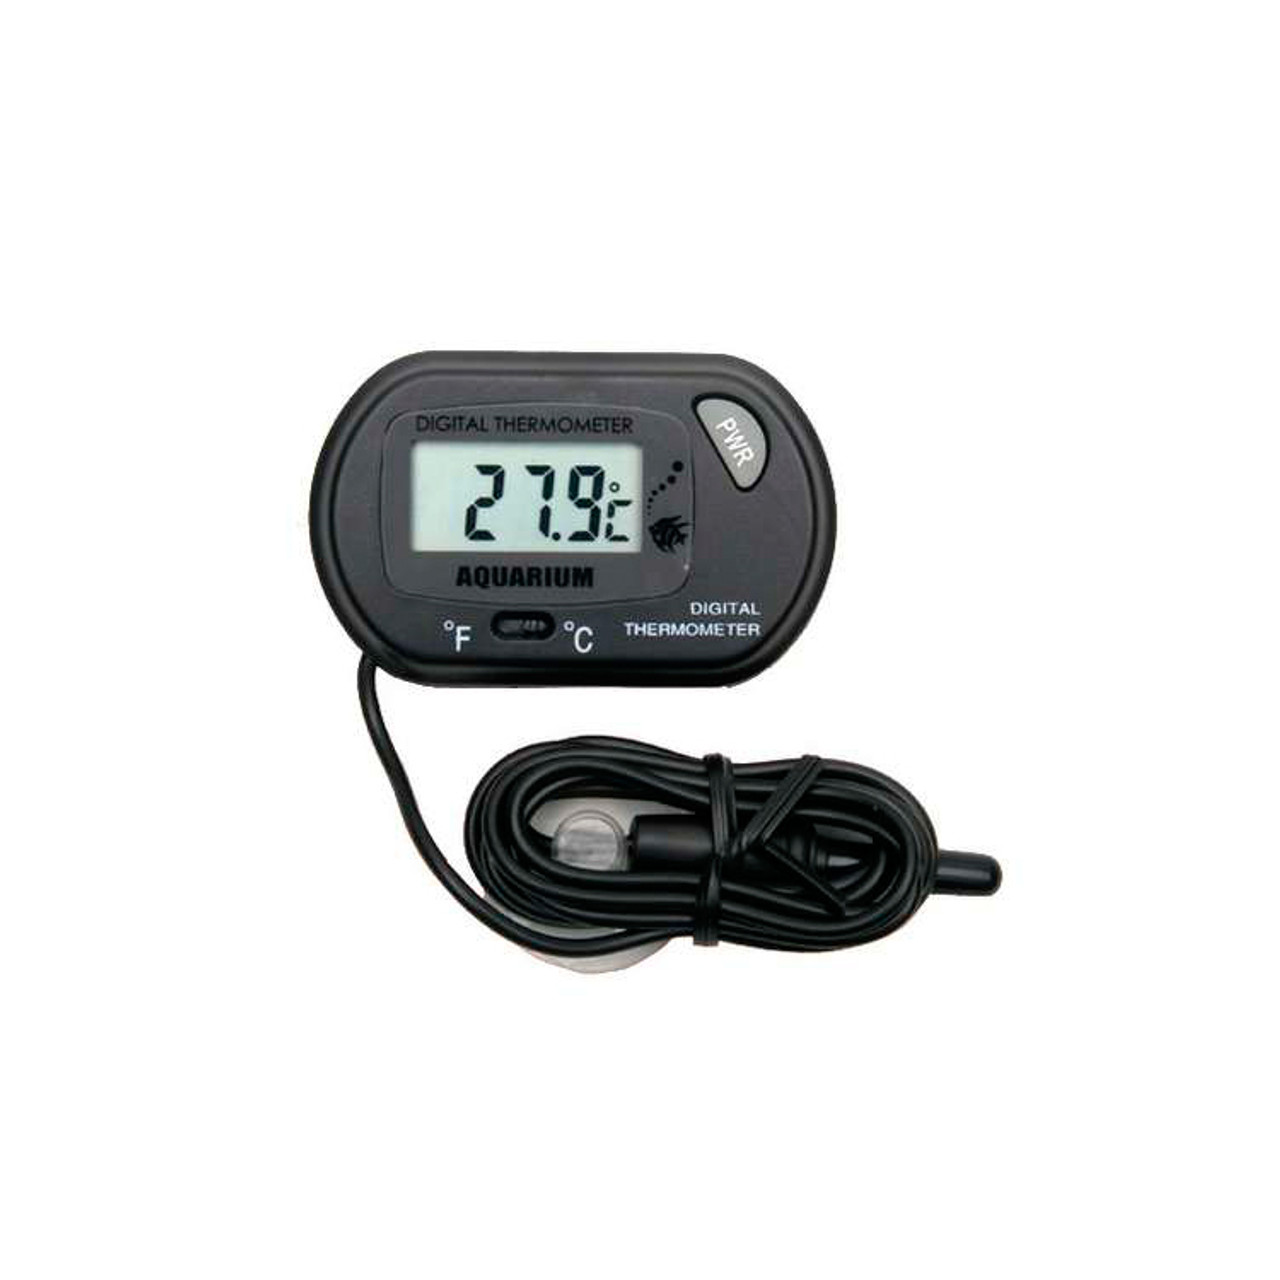 Zoo Med High Range Reptile Thermometer, TH-10